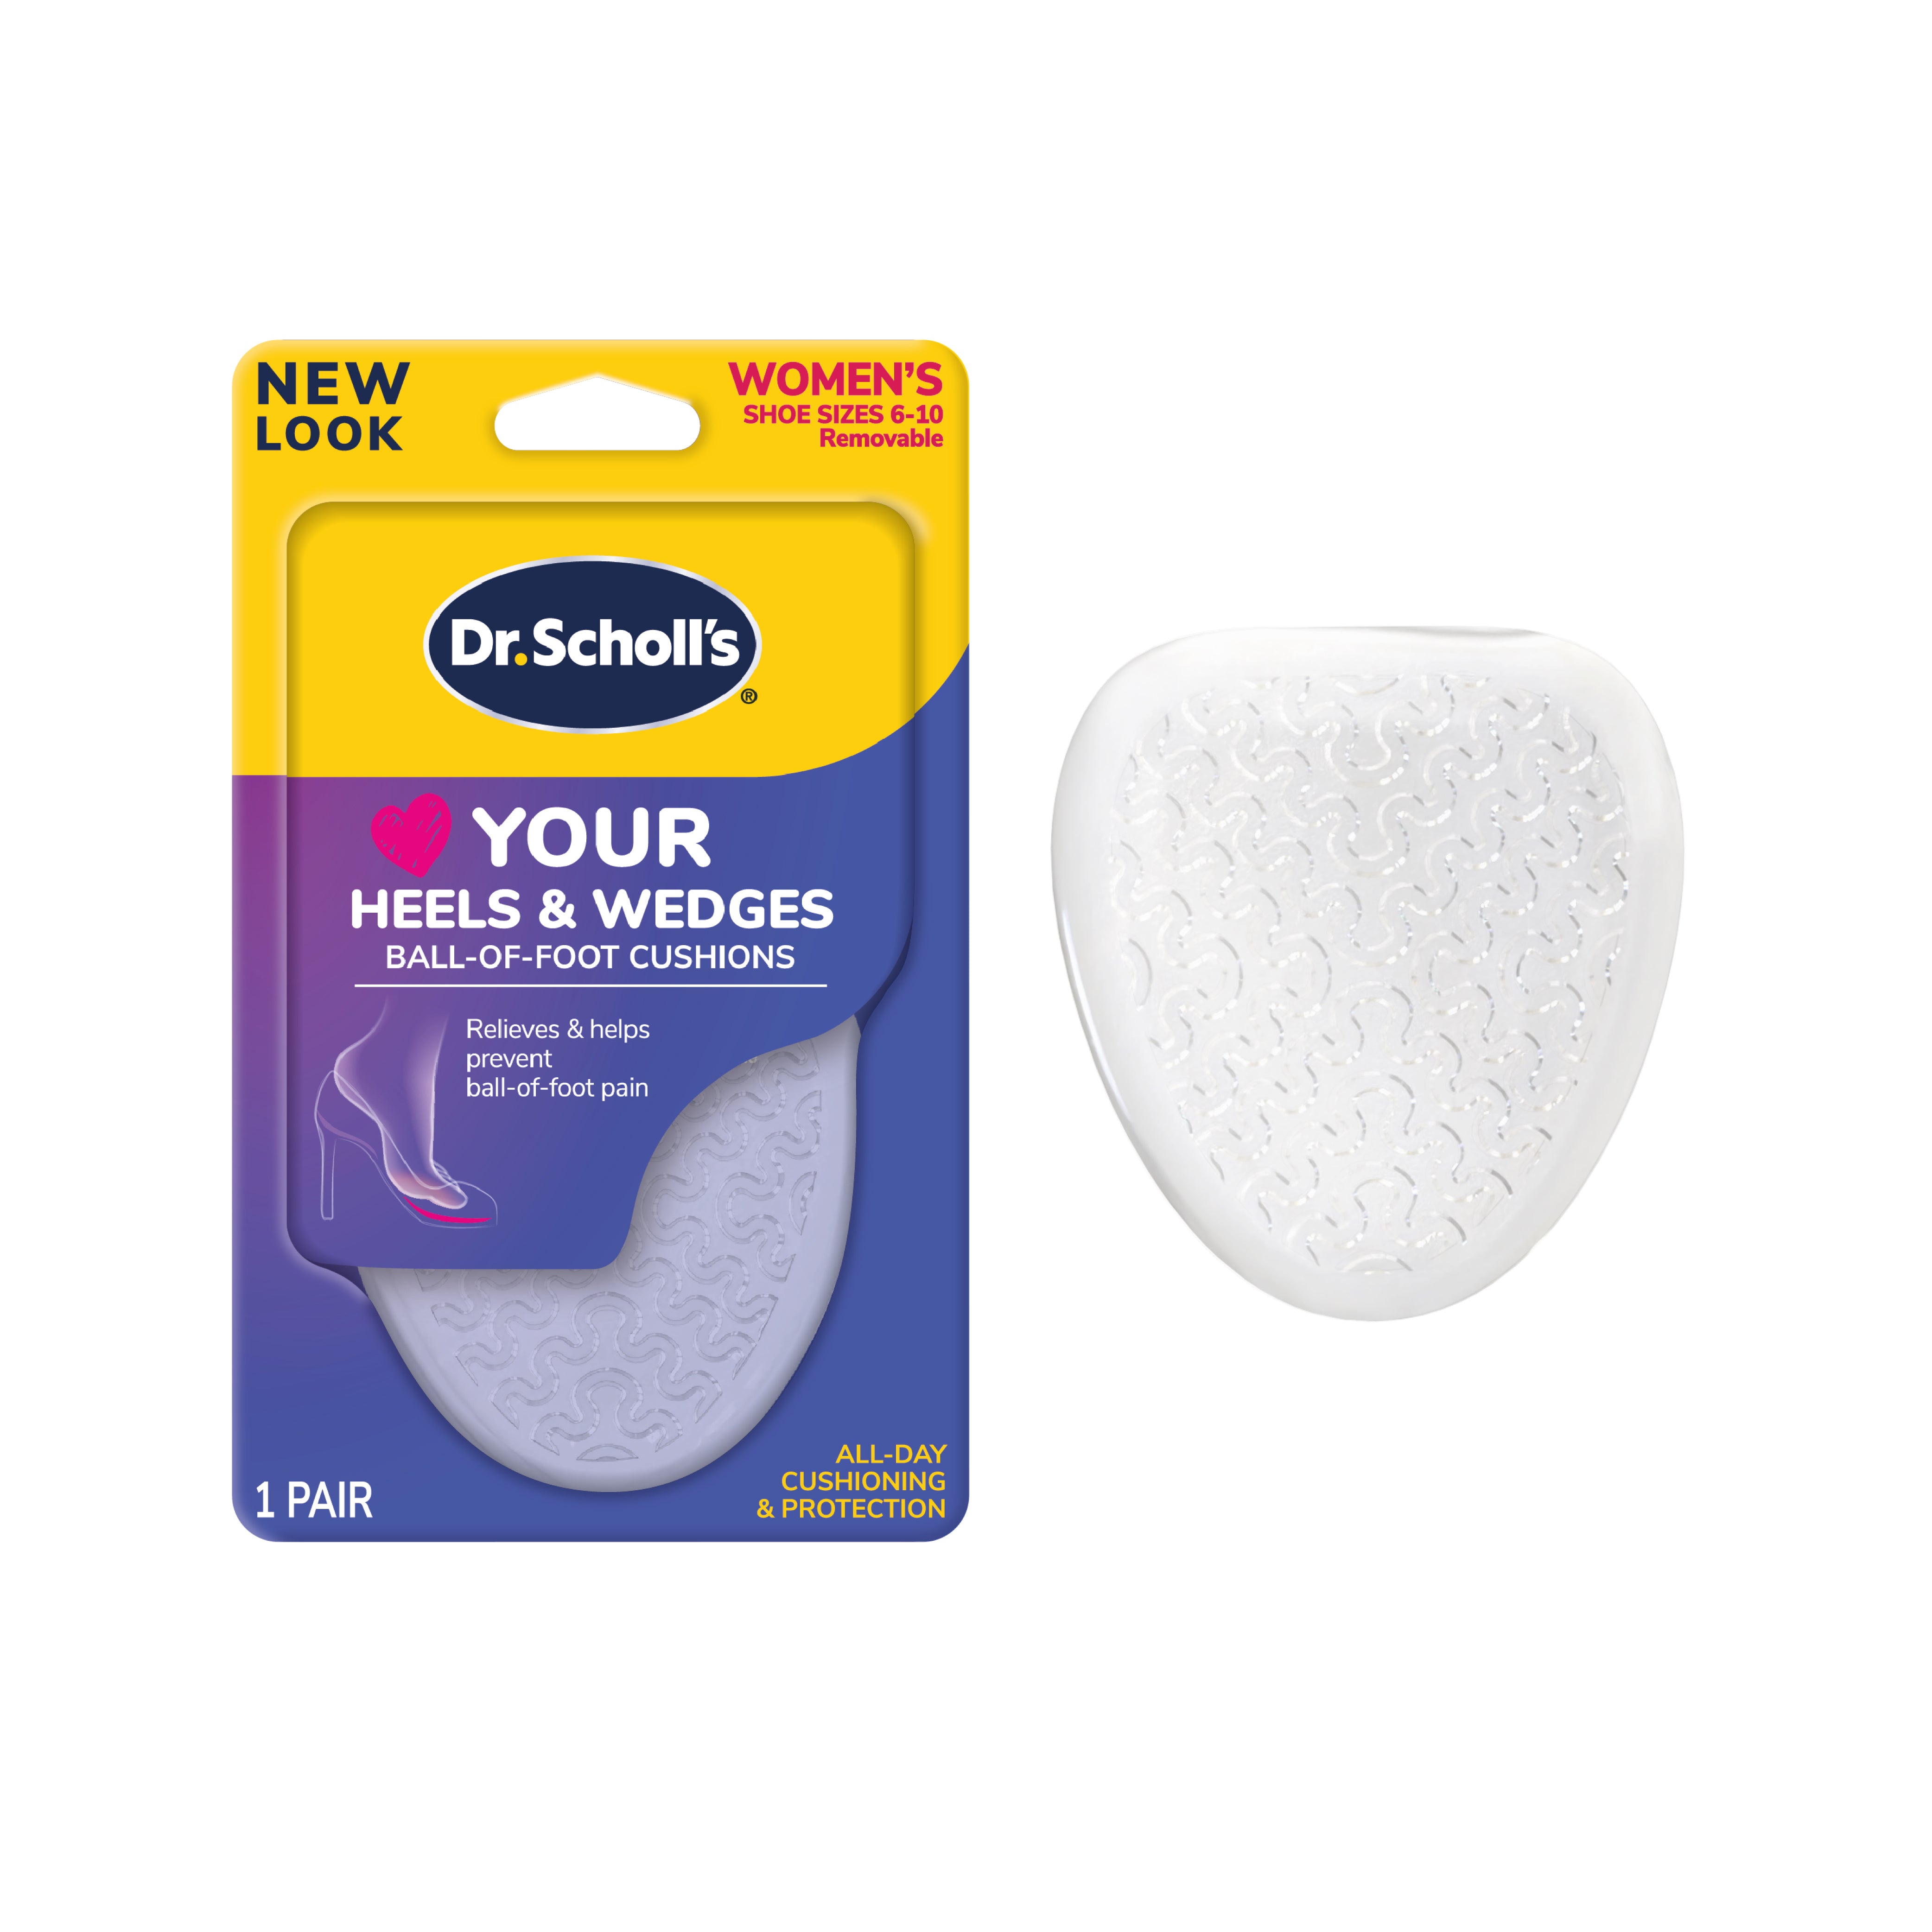 Dr. Scholl's Teams Up with Sportscaster Erin Andrews on her Road